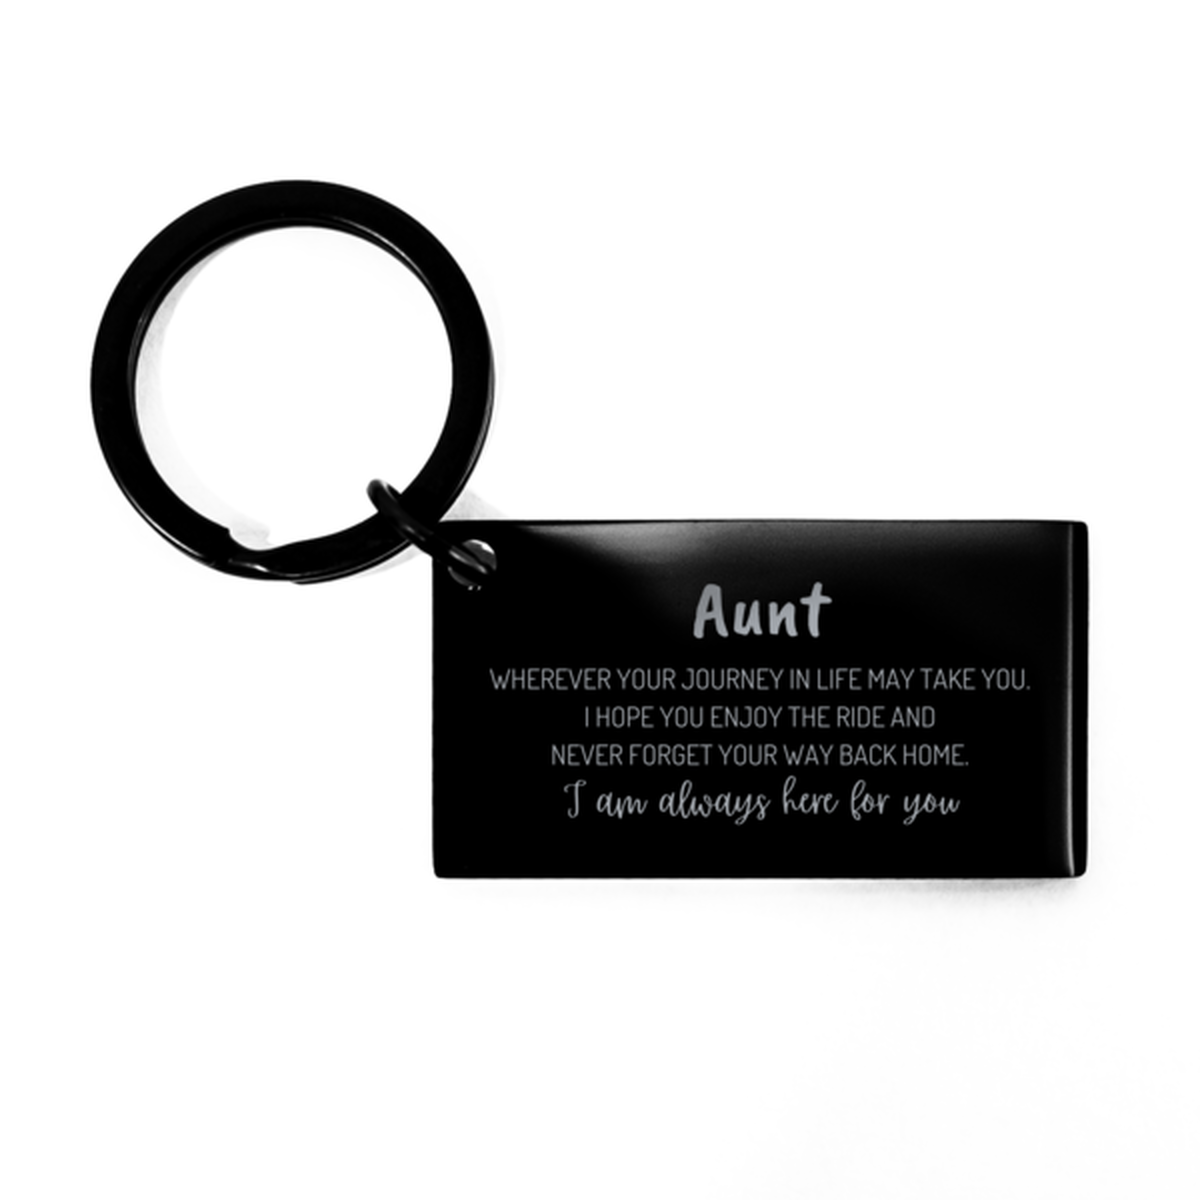 Aunt wherever your journey in life may take you, I am always here for you Aunt Keychain, Awesome Christmas Gifts For Aunt, Aunt Birthday Gifts for Men Women Family Loved One